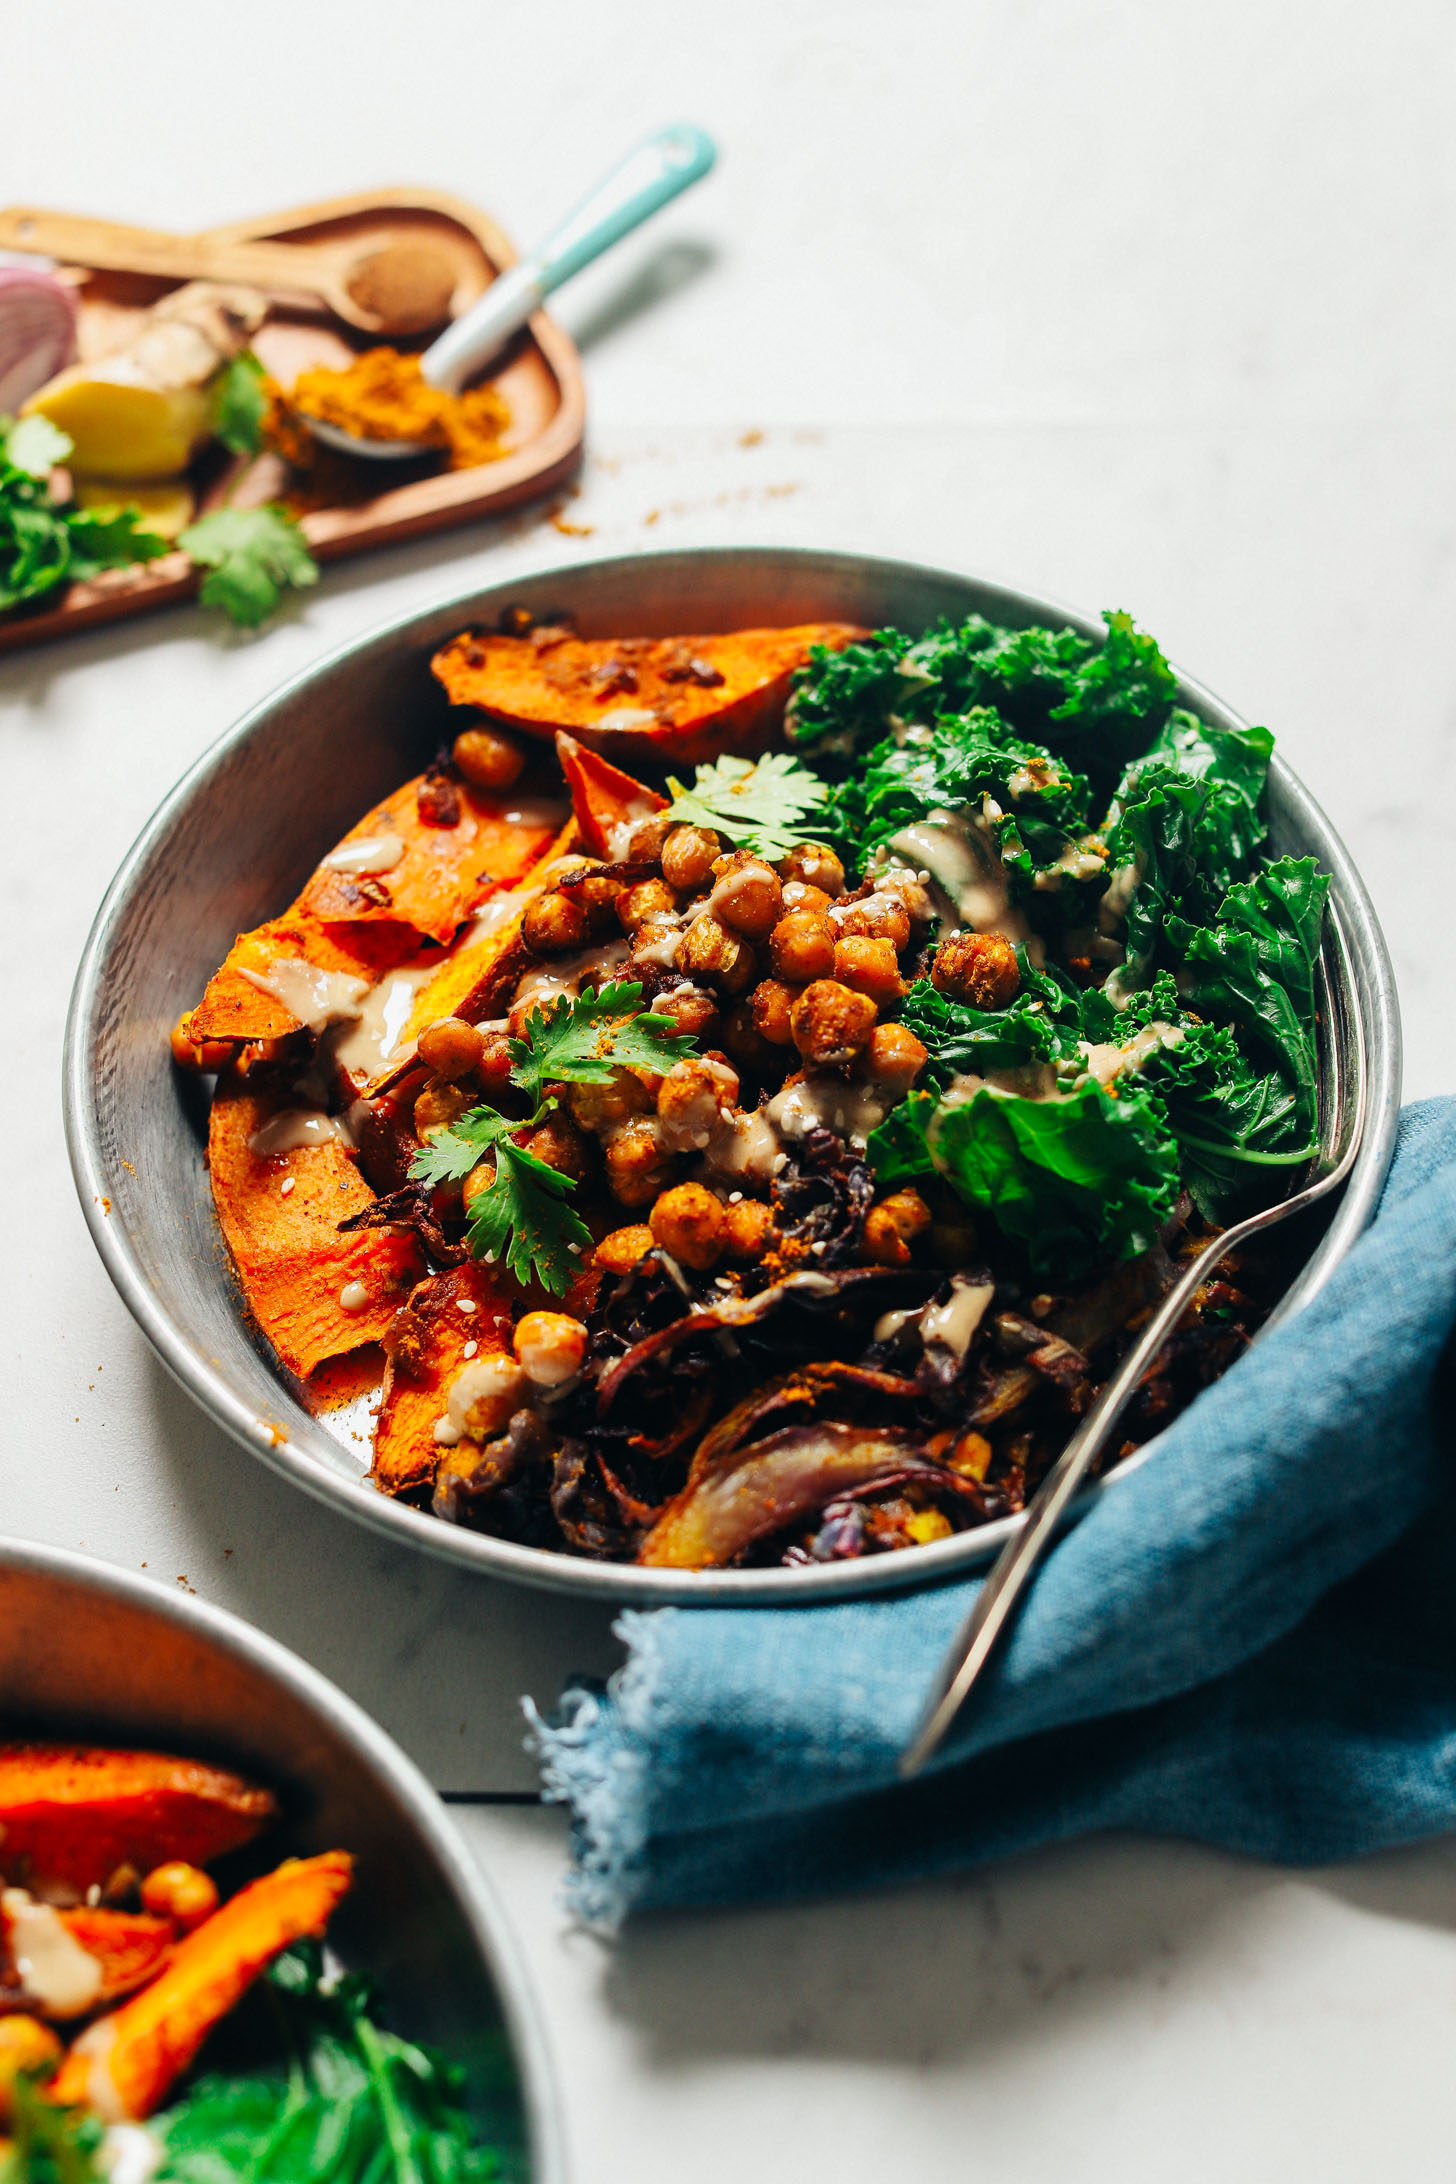 Bowl filled with a serving of our Sheet Pan Dinner recipe made with Curried Sweet Potatoes, Crispy Chickpeas, Cabbage, and Greens